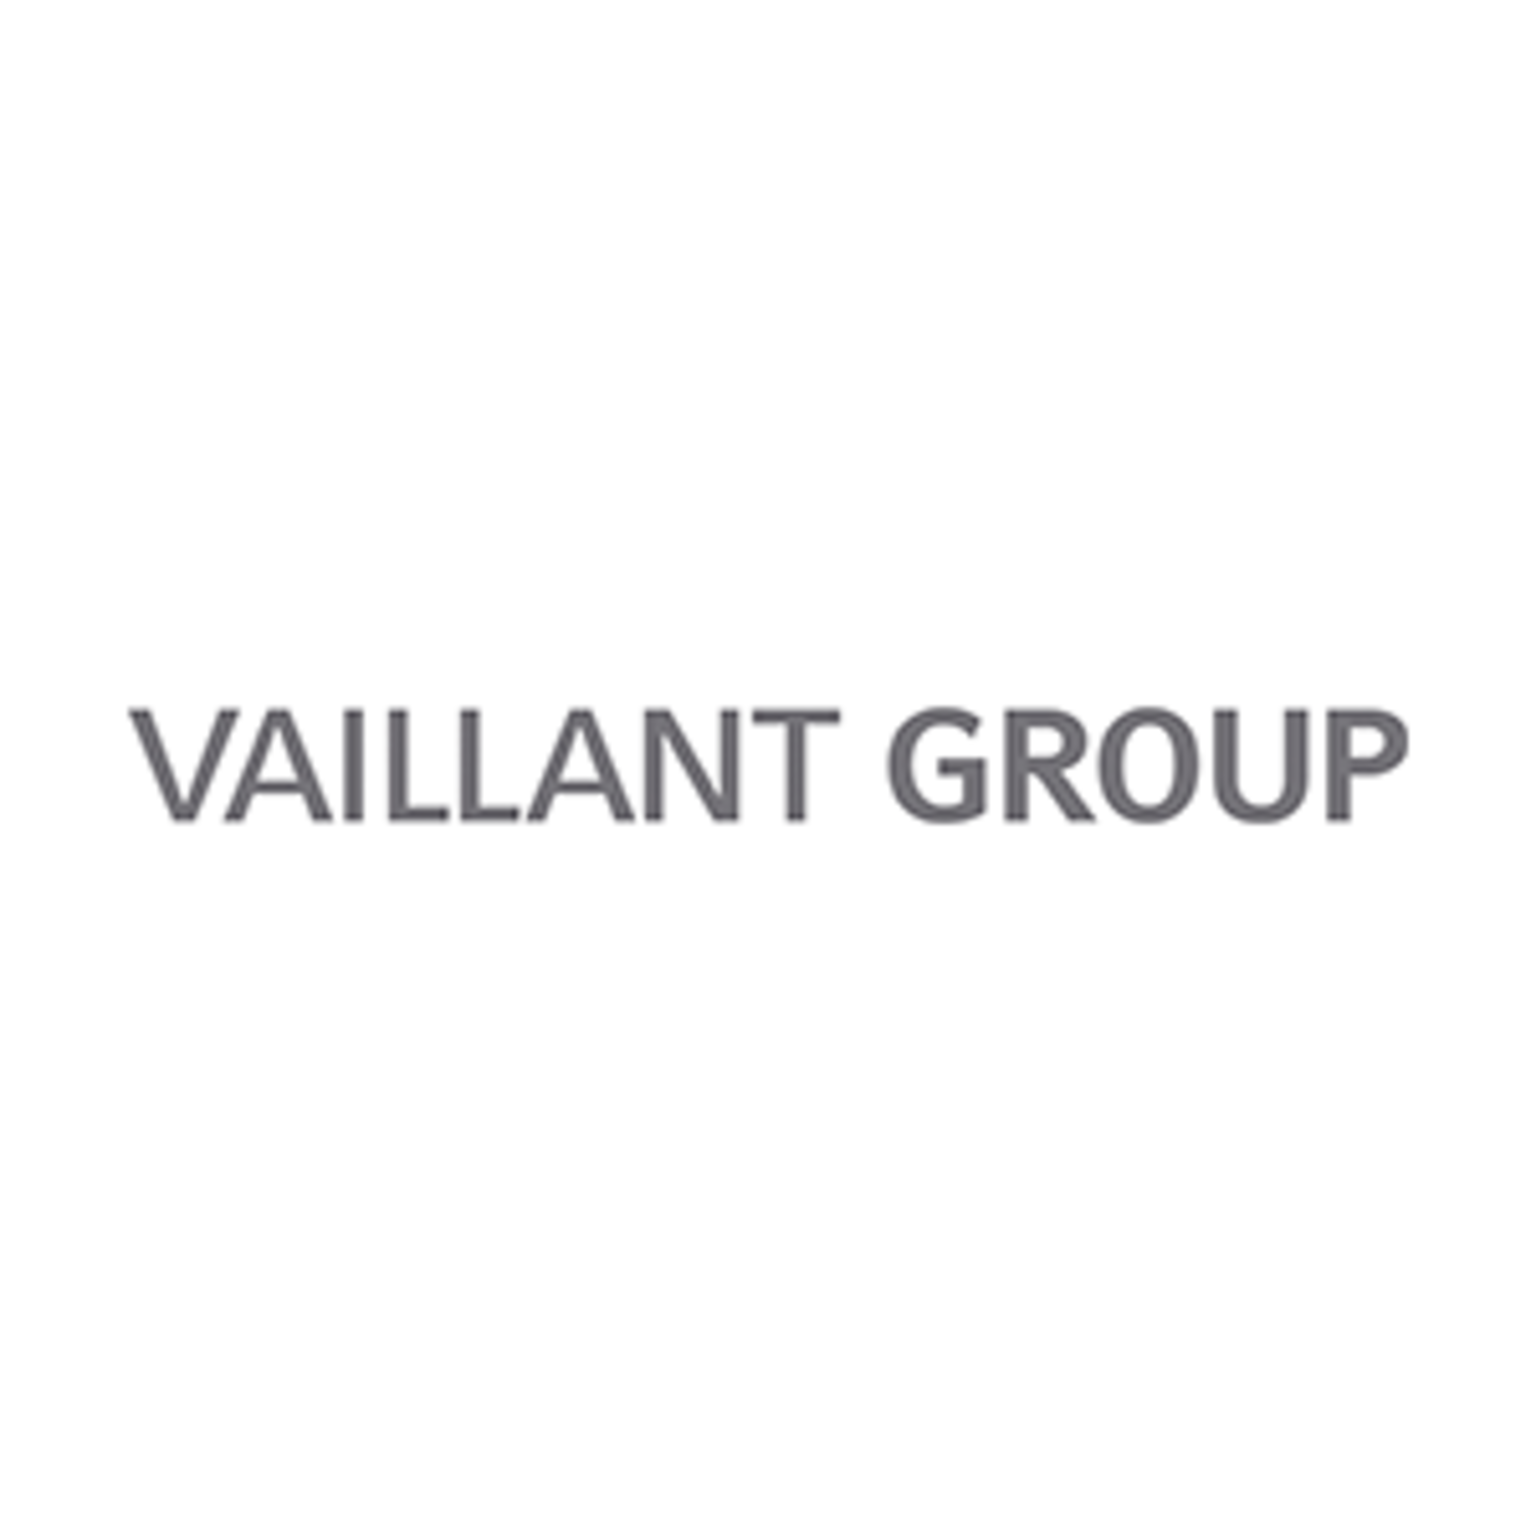 Vaillant group